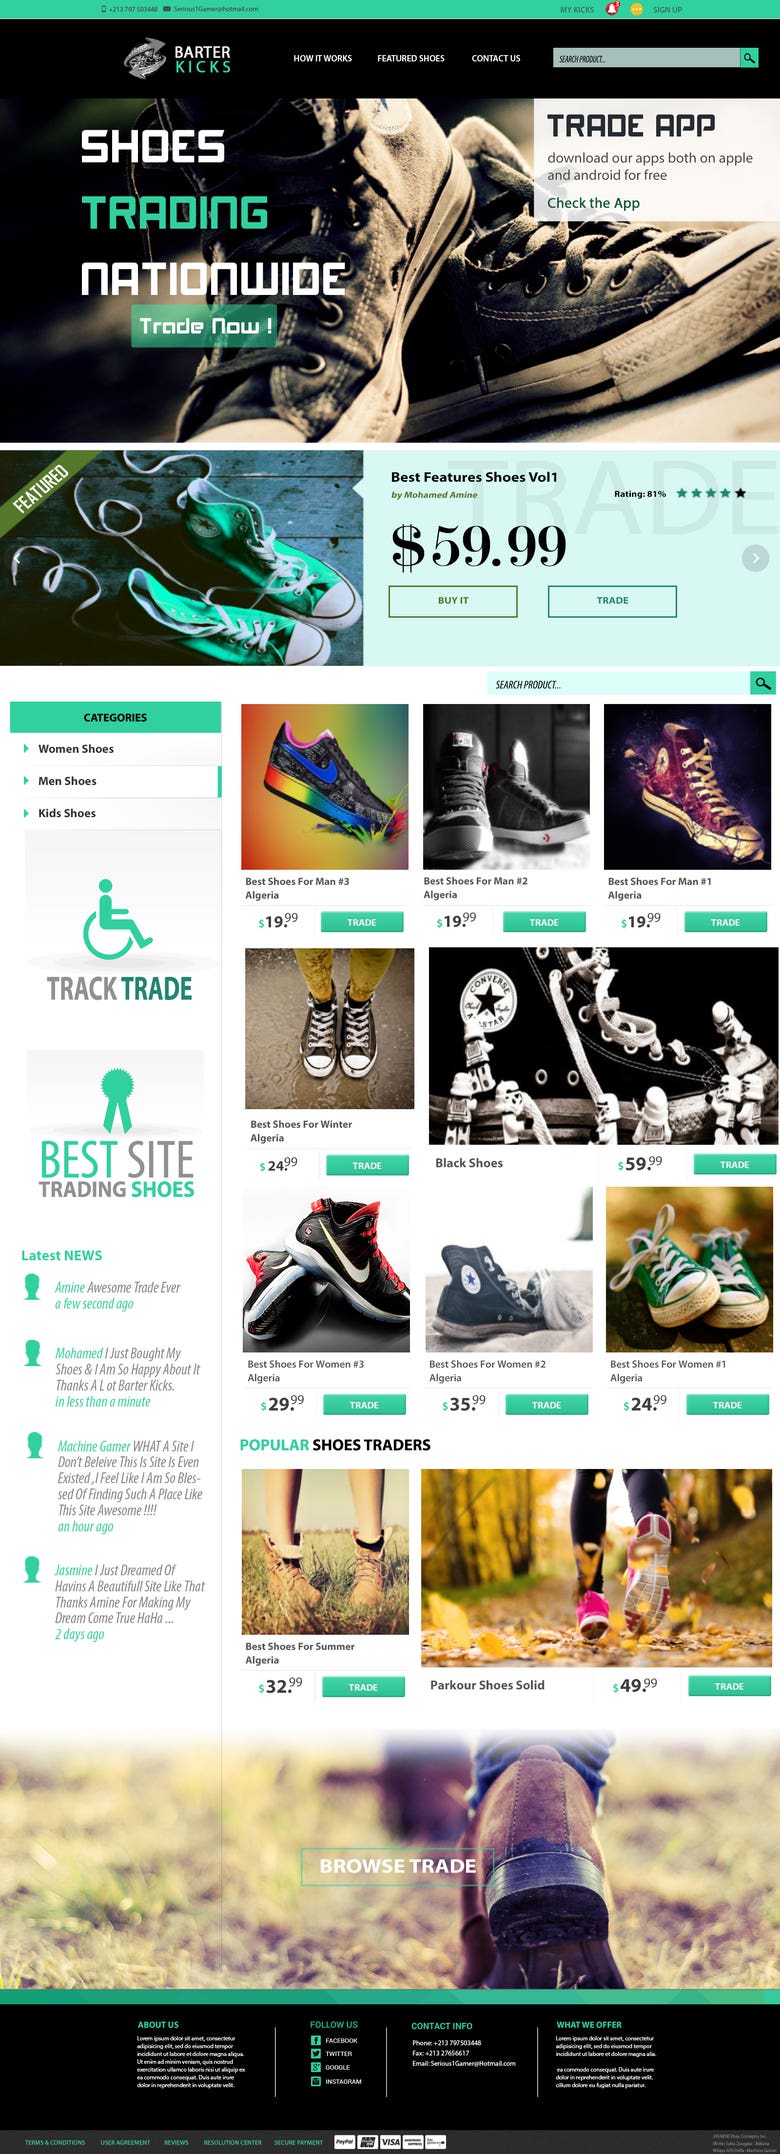 Website Design Template For Shoes Trade